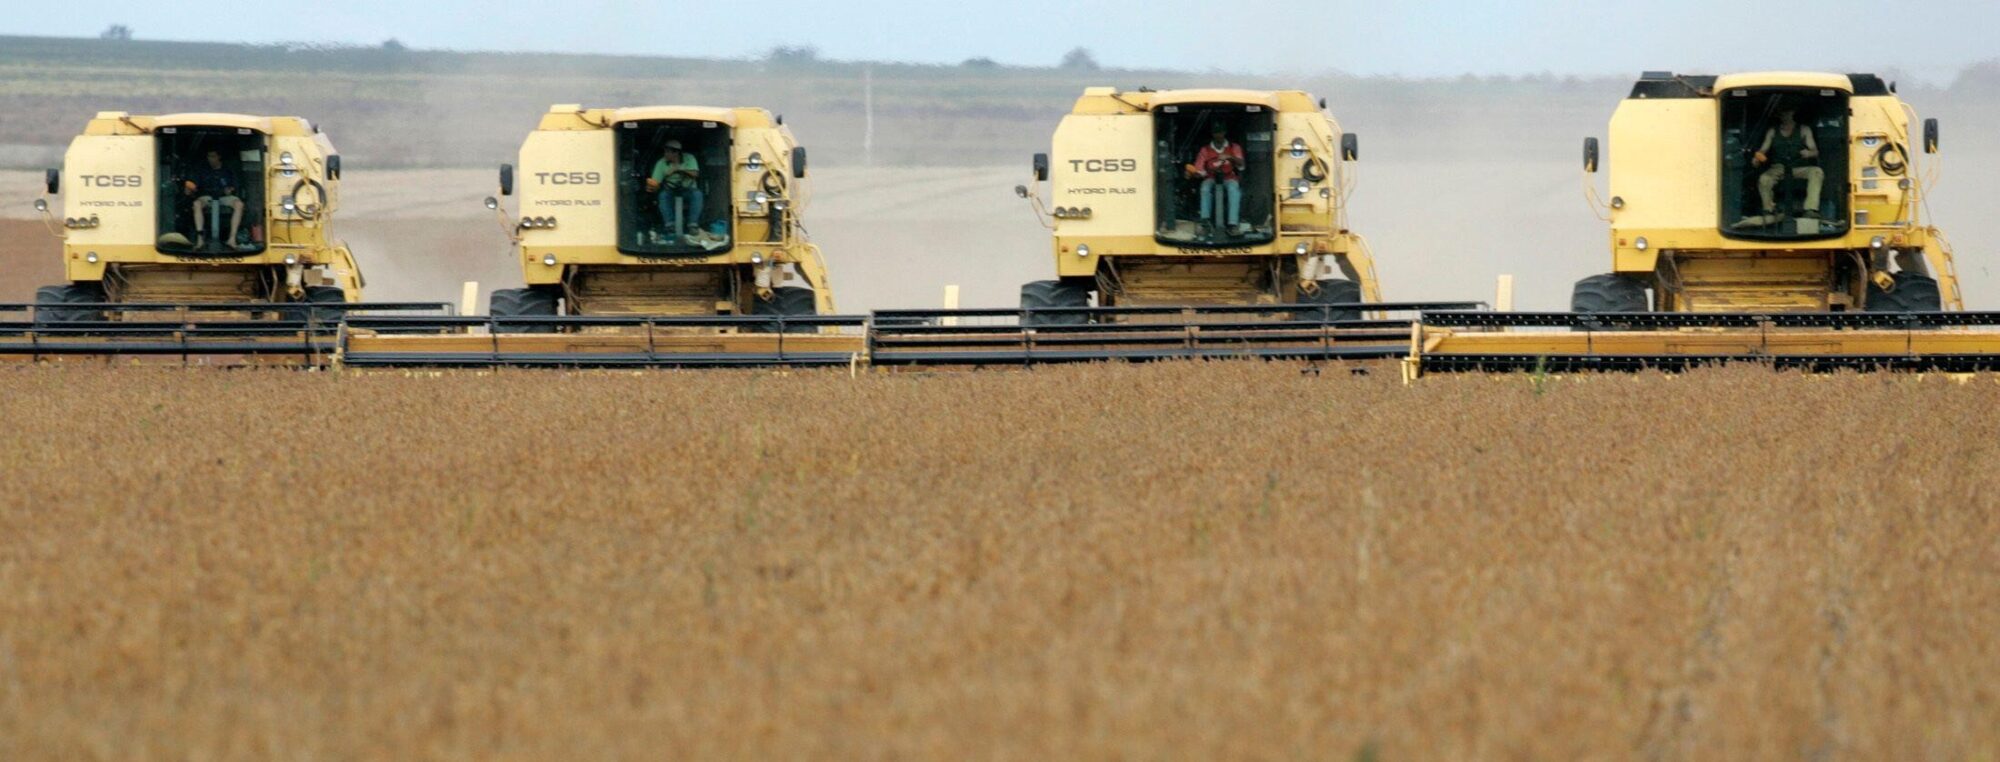 <p>China is the main buyer of Brazilian soy. According to senior agriculture ministry advisor Larissa Wachholz, environmental clauses should not hinder the agriculture trade (image: Alamy)</p>